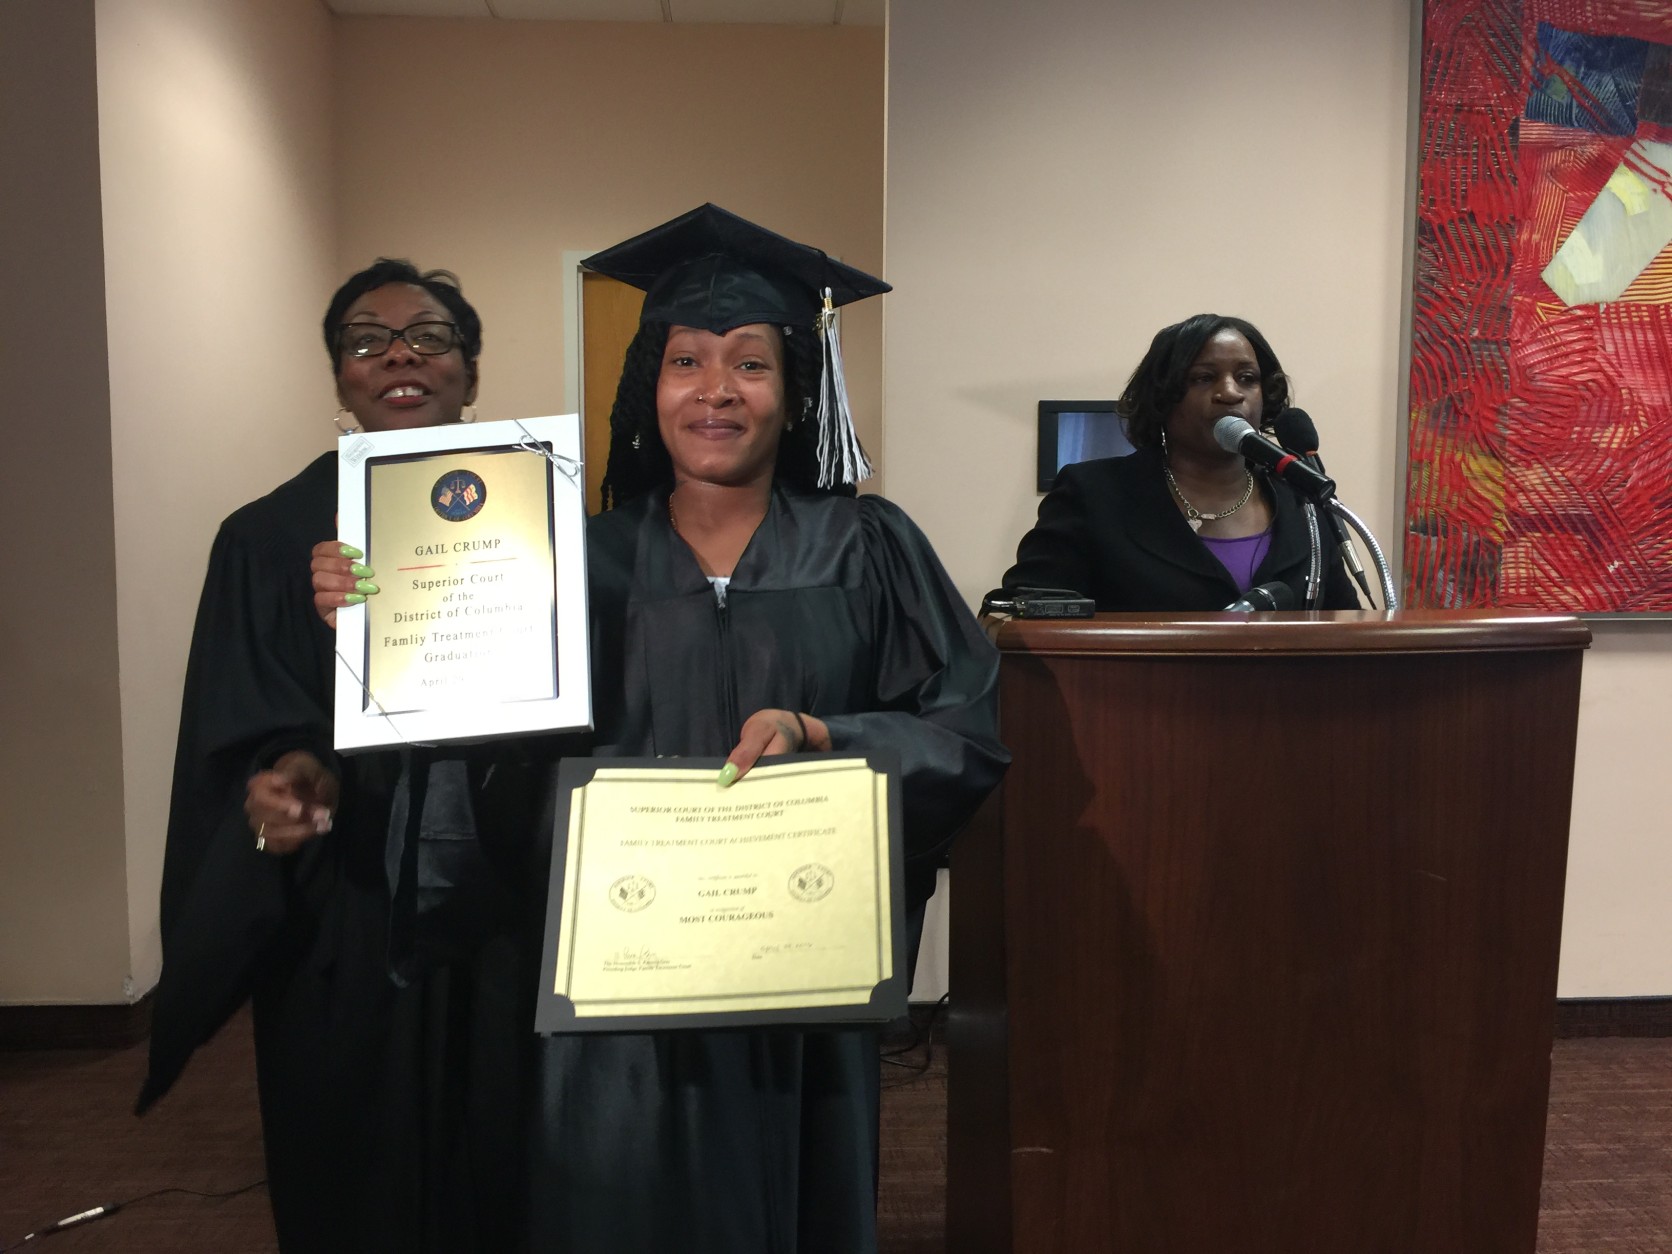 Gail Crump received the "Most Courageous" award. "Despite her initial reluctance, she took a chance on herself and as a result of that she's here graduating today. We're so proud of her," said Dr. Sariah Beatty, Coordinator, Family Treatment Court on right. Pictured also with Judge Pam Gray. (WTOP/Kristi King)